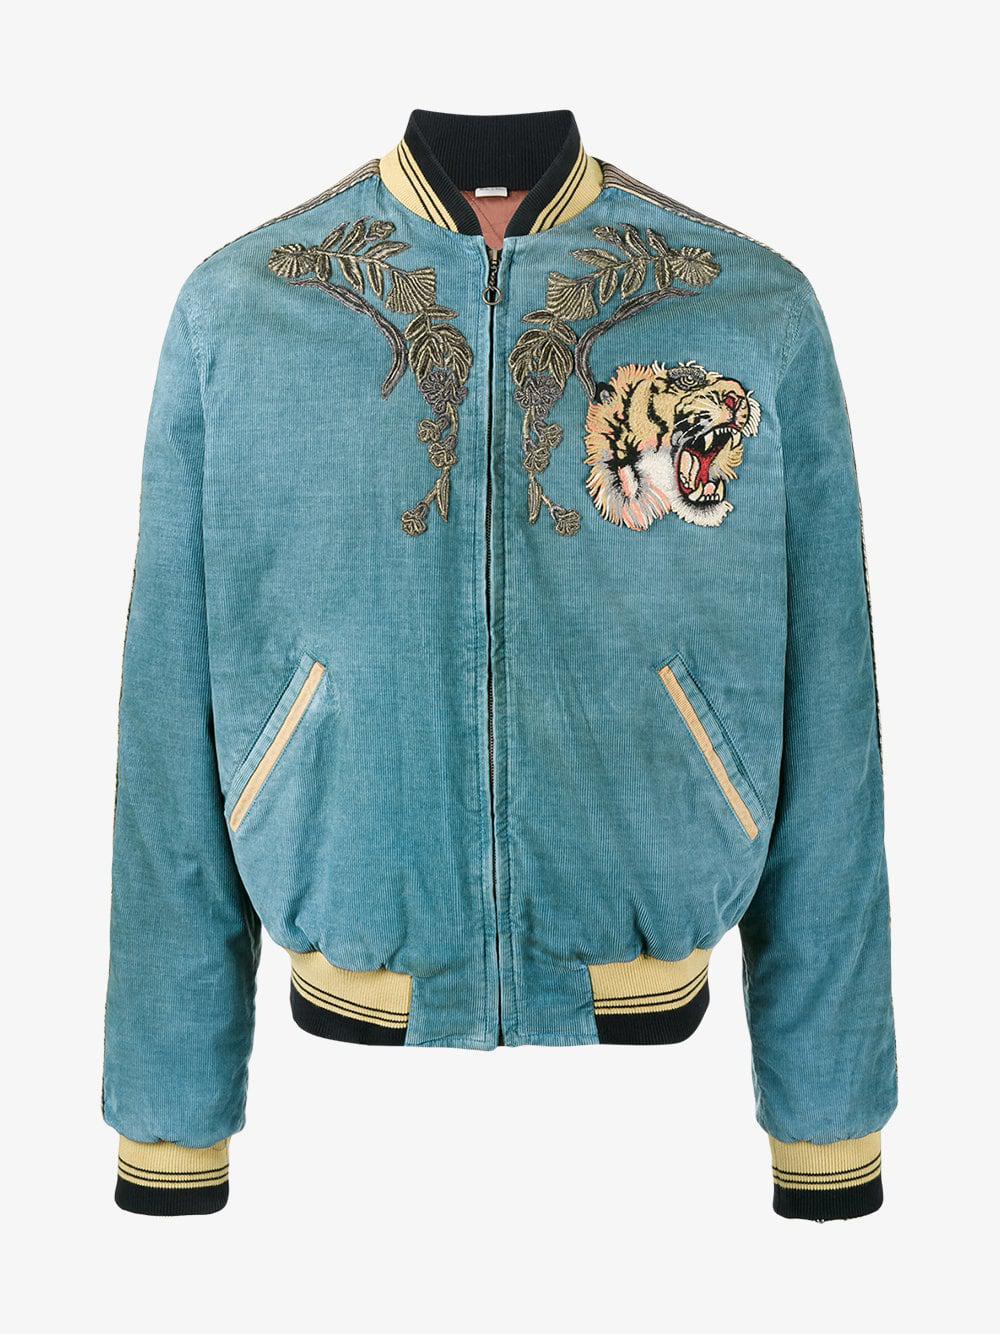 Gucci Loved Embroidered Bomber Jacket in Blue for Men